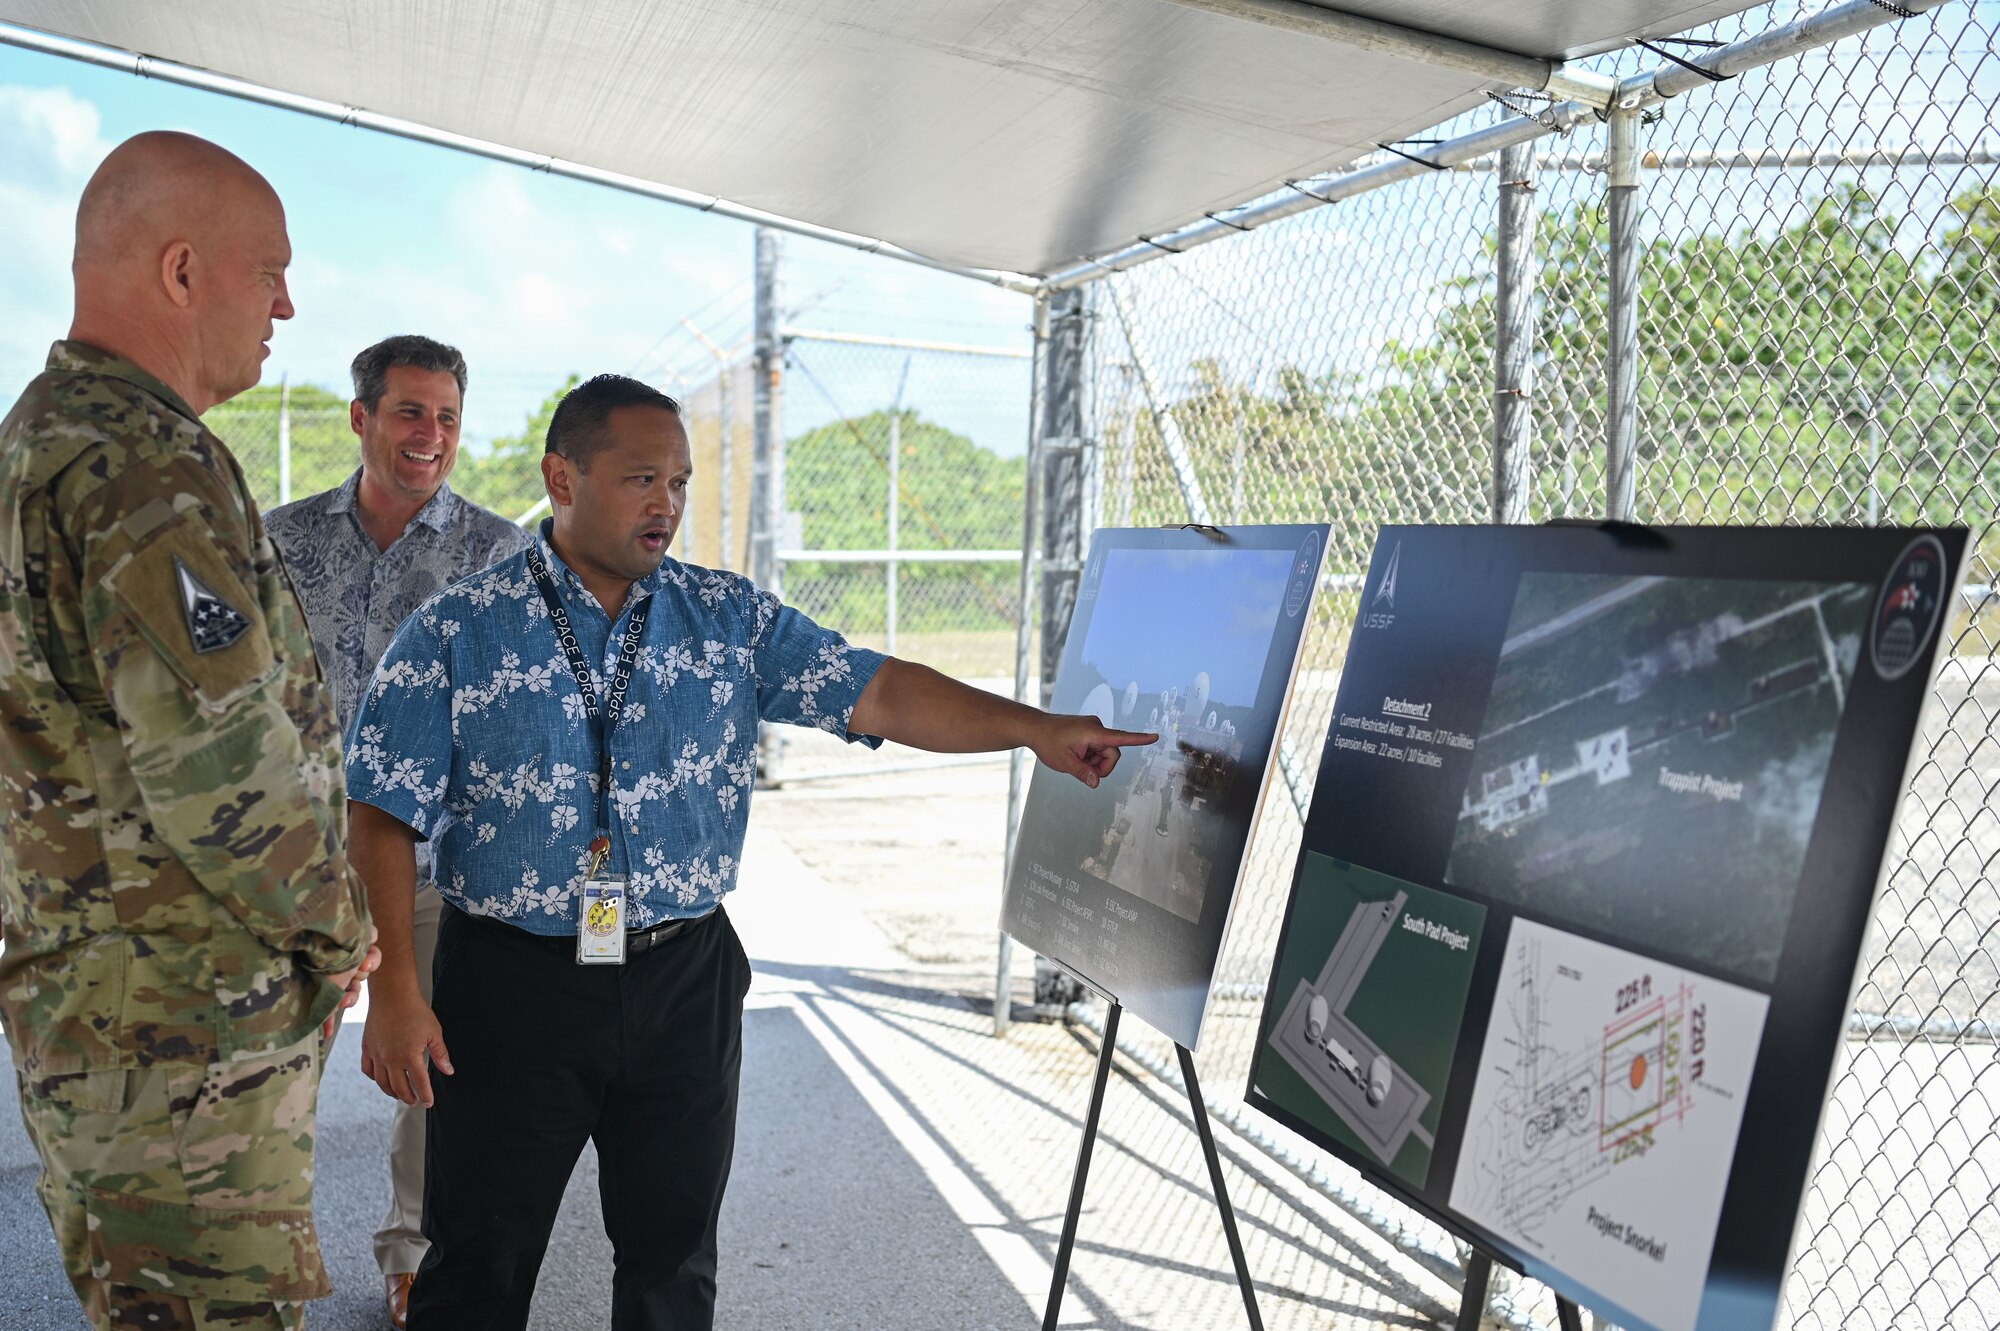 U.S. Space Force Gen. John W. “Jay” Raymond, Chief of Space Operations, receives a tour of Detachment 2, 21st Space Operations Squadron, which has the longest mission at Andersen Air Force Base, Guam, March 26, 2022. During his visit, Raymond met with U.S. Air Force Brig. Gen. Jeremy Sloane, commander of the 36th Wing, received a mission brief, toured the 21st Space Operations Squadron, Detachment 2, and shared lunch with the Airmen, 12 Guardians assigned here and their spouses. (U.S. Air Force photo by Staff Sgt. Aubree Owens)